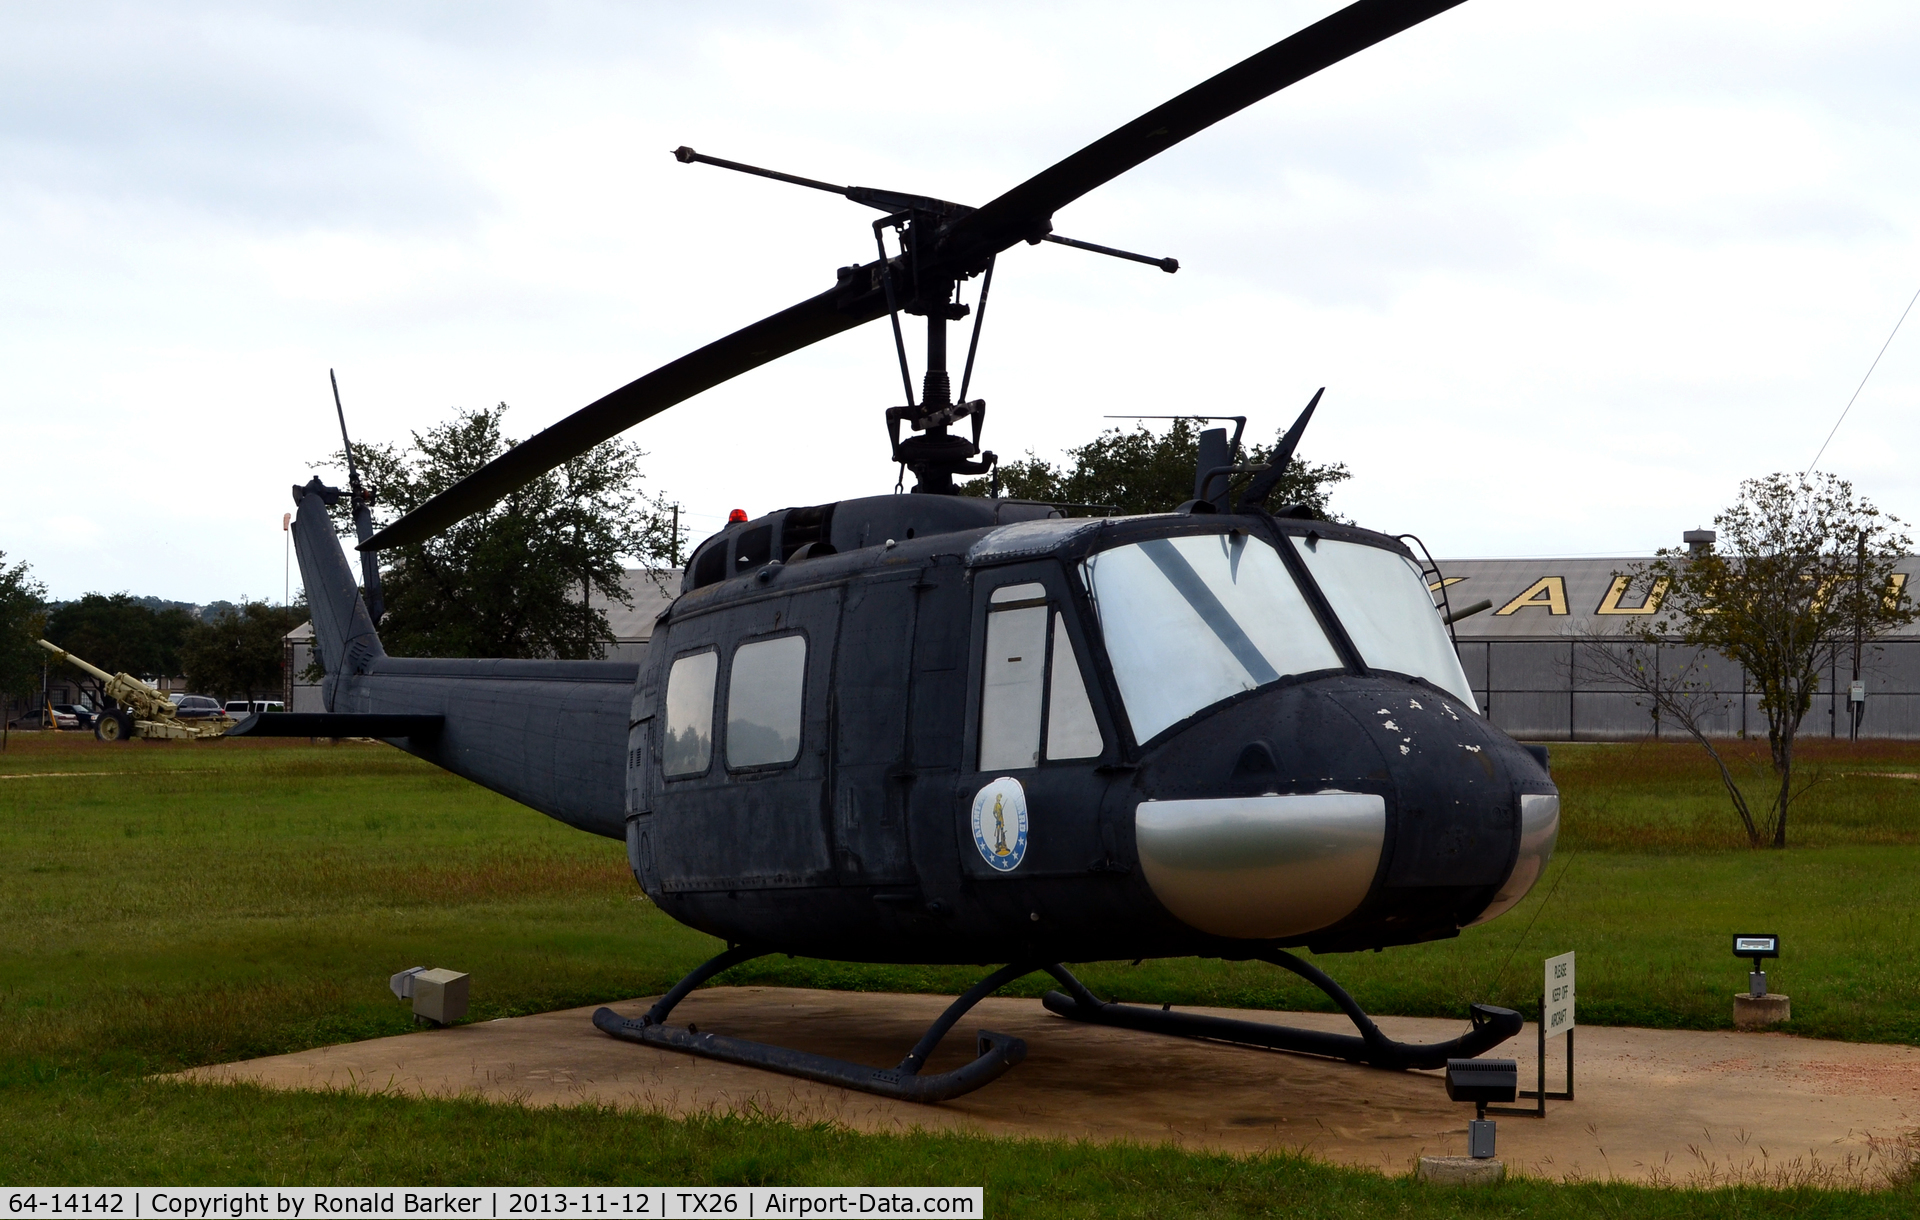 64-14142, 1964 Bell UH-1M Iroquois C/N 1266, UH-1M shown as 16189, Camp Mabry, TX